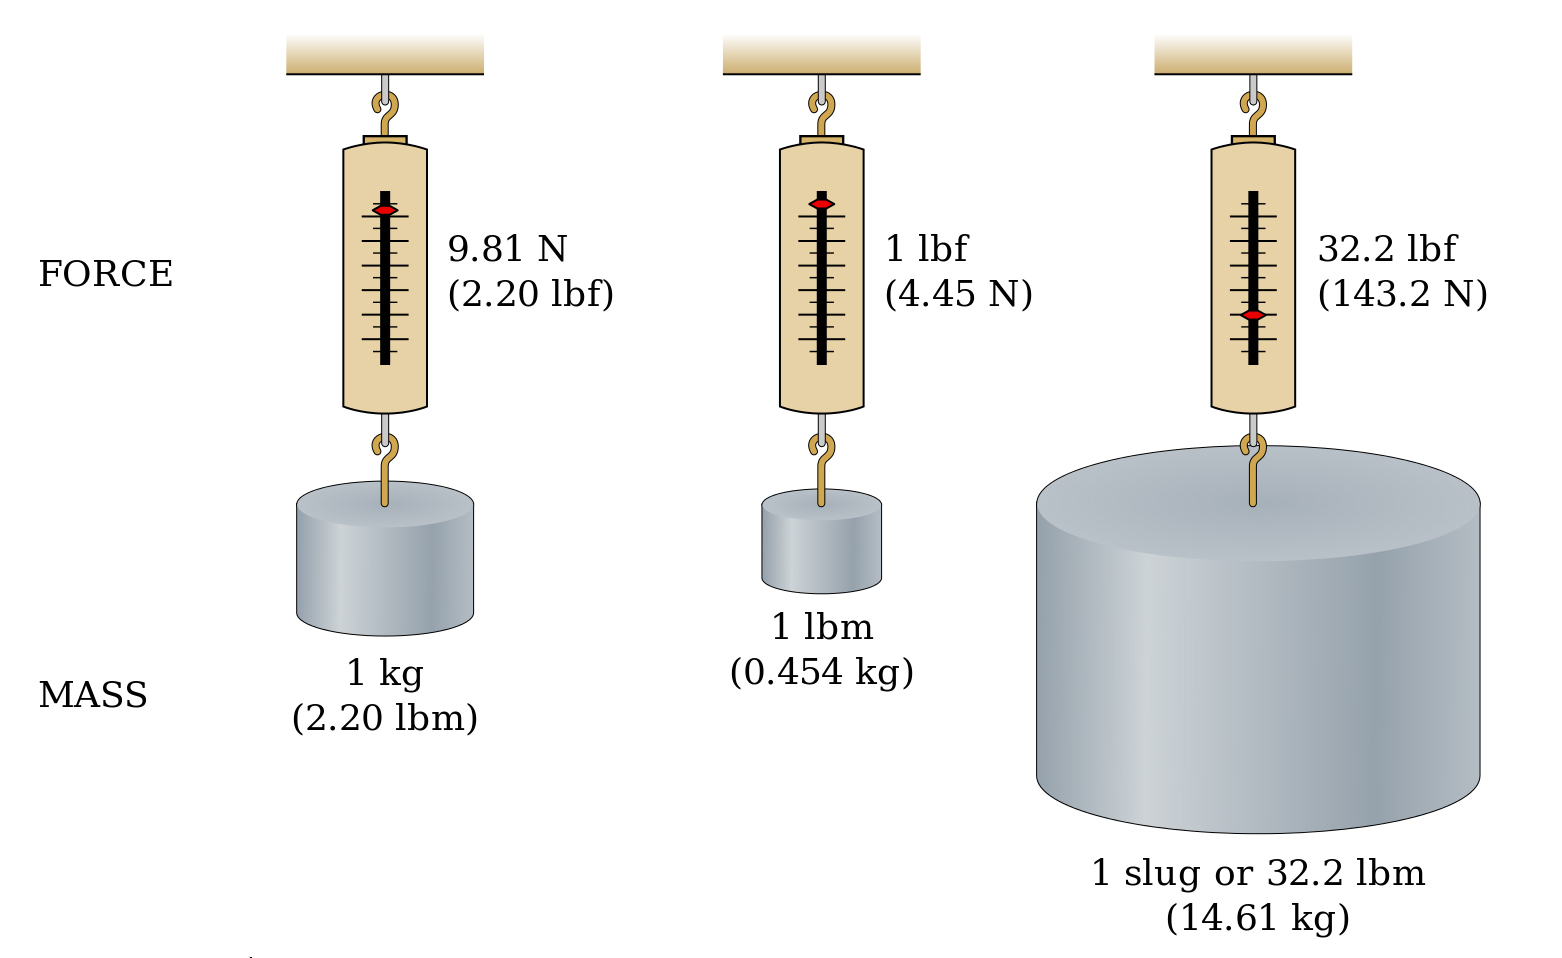 Illustration of different torque units including Newton meters, pound-force feet, and kilogram-force centimeters